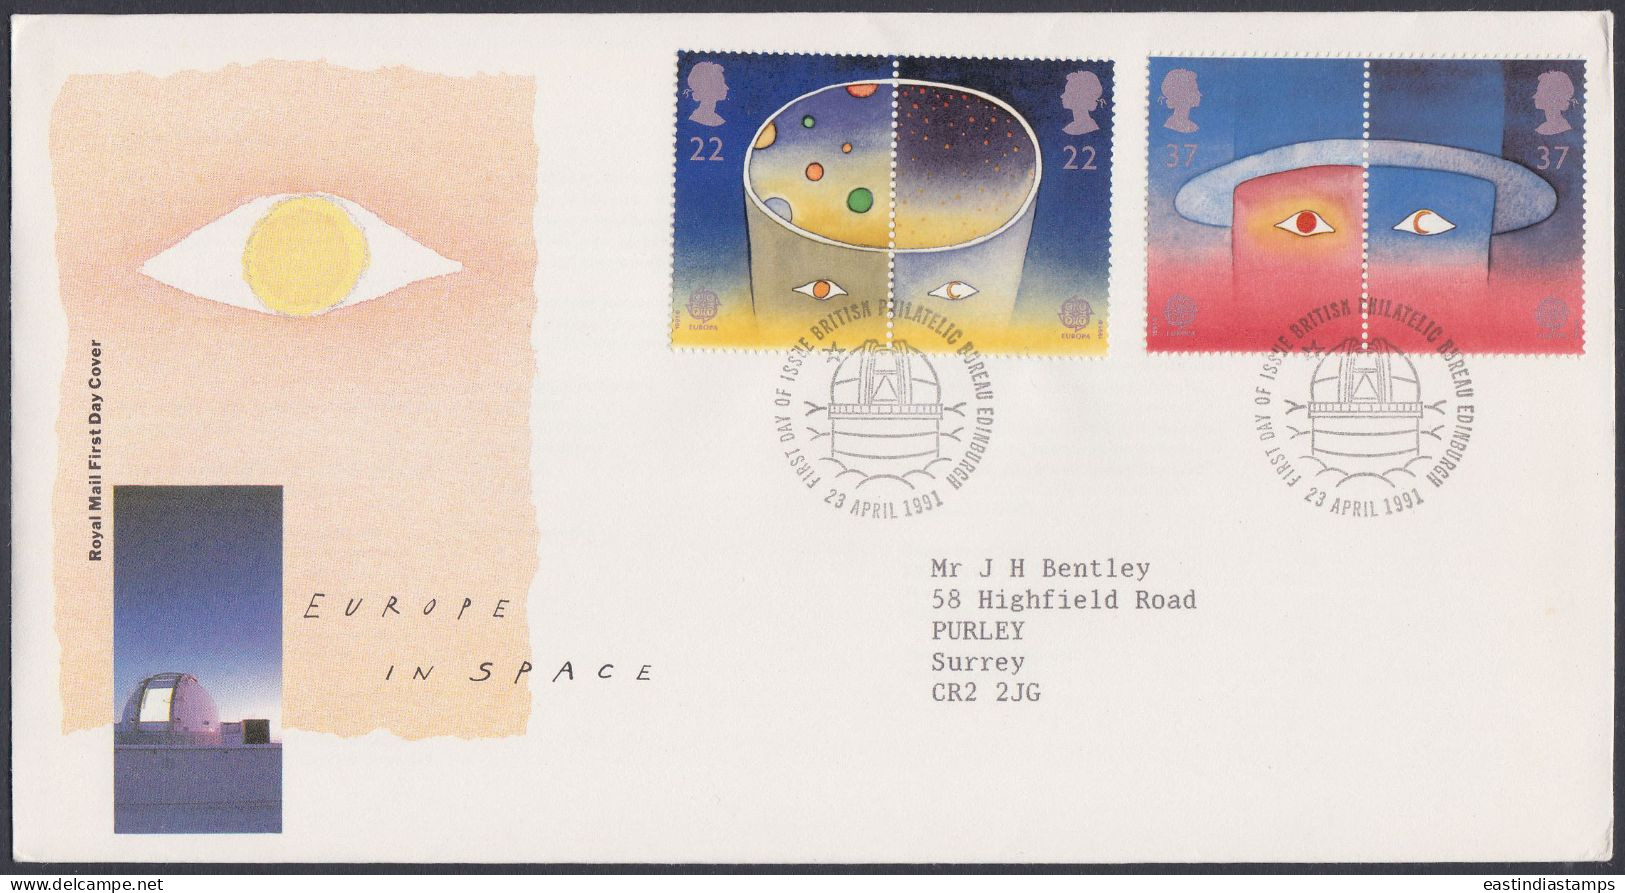 GB Great Britain 1991 FDC Europe In Space, Observatory, Stars, Planets, Pictorial Postmark, First Day Cover - Covers & Documents